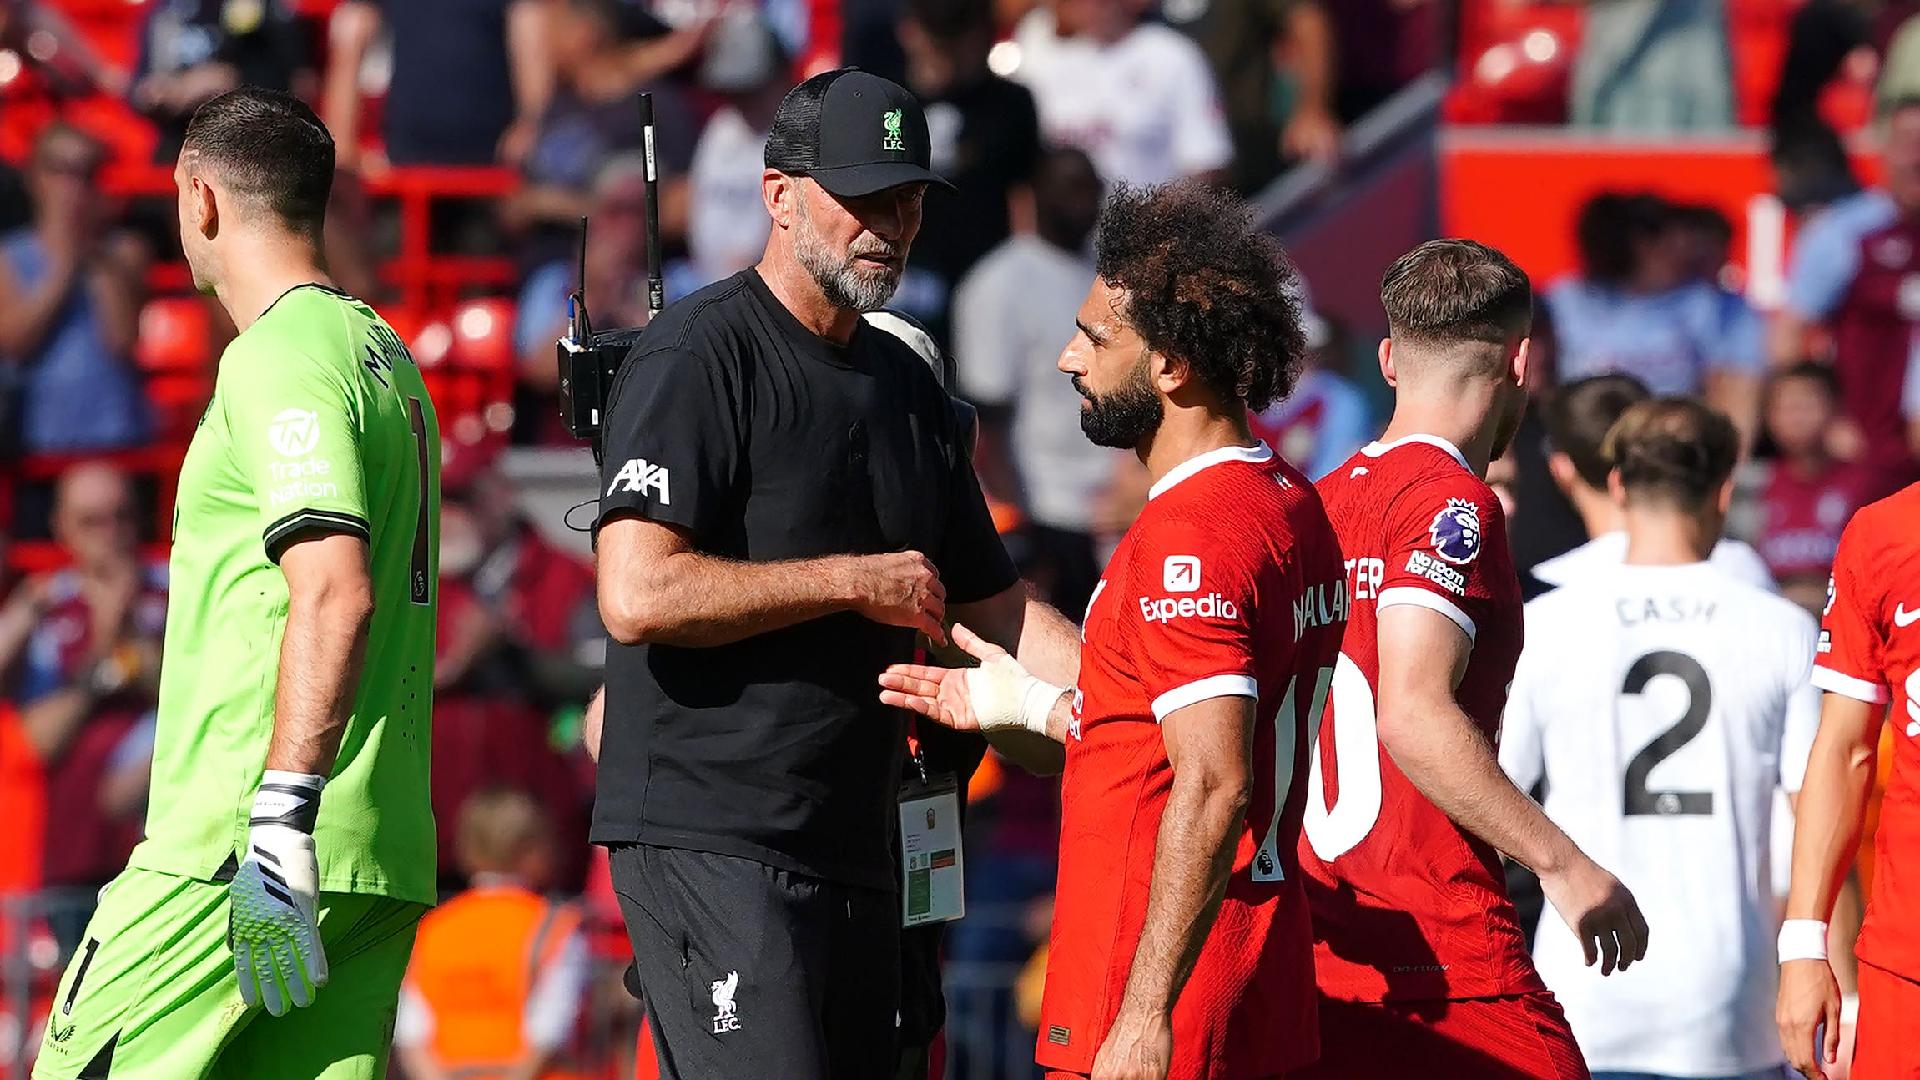 Jürgen Klopp could find next 'special' Liverpool debut soon as